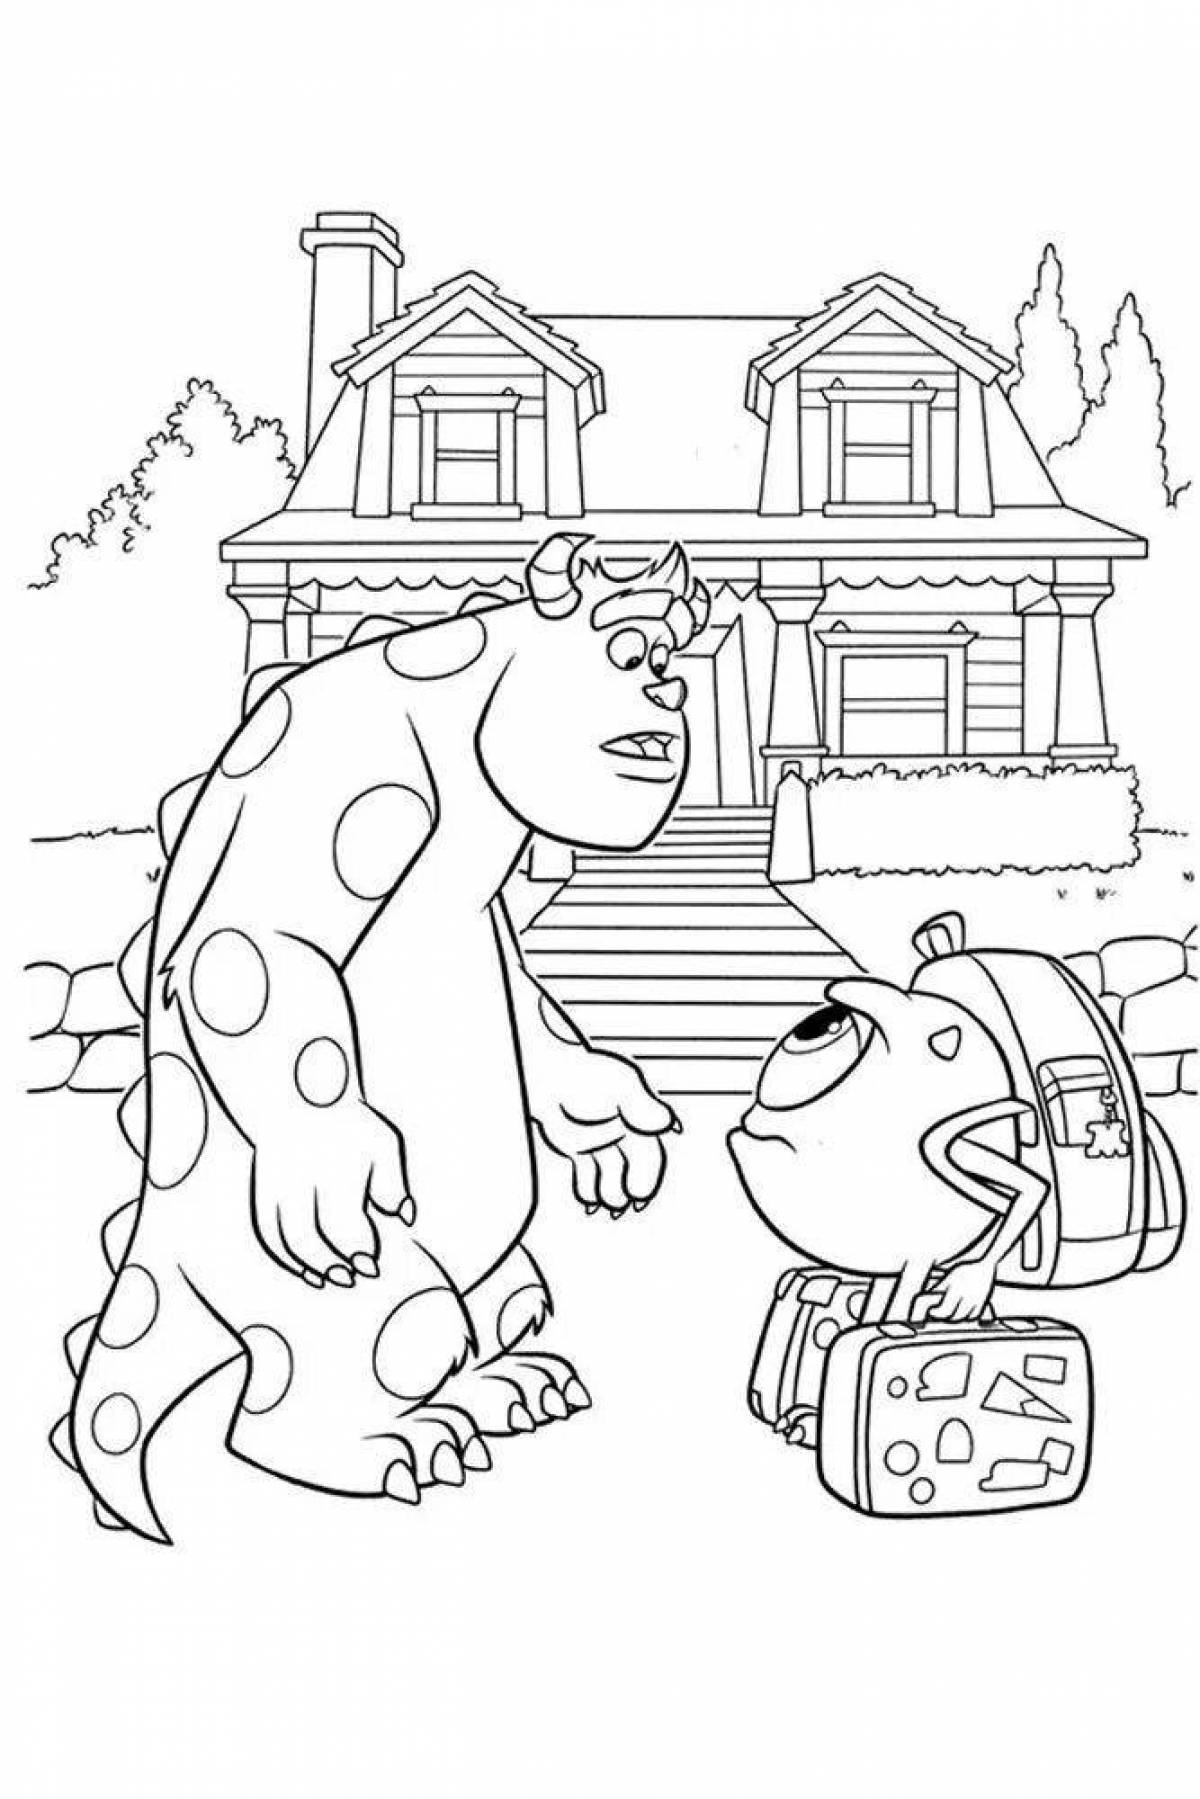 Monsters university coloring page